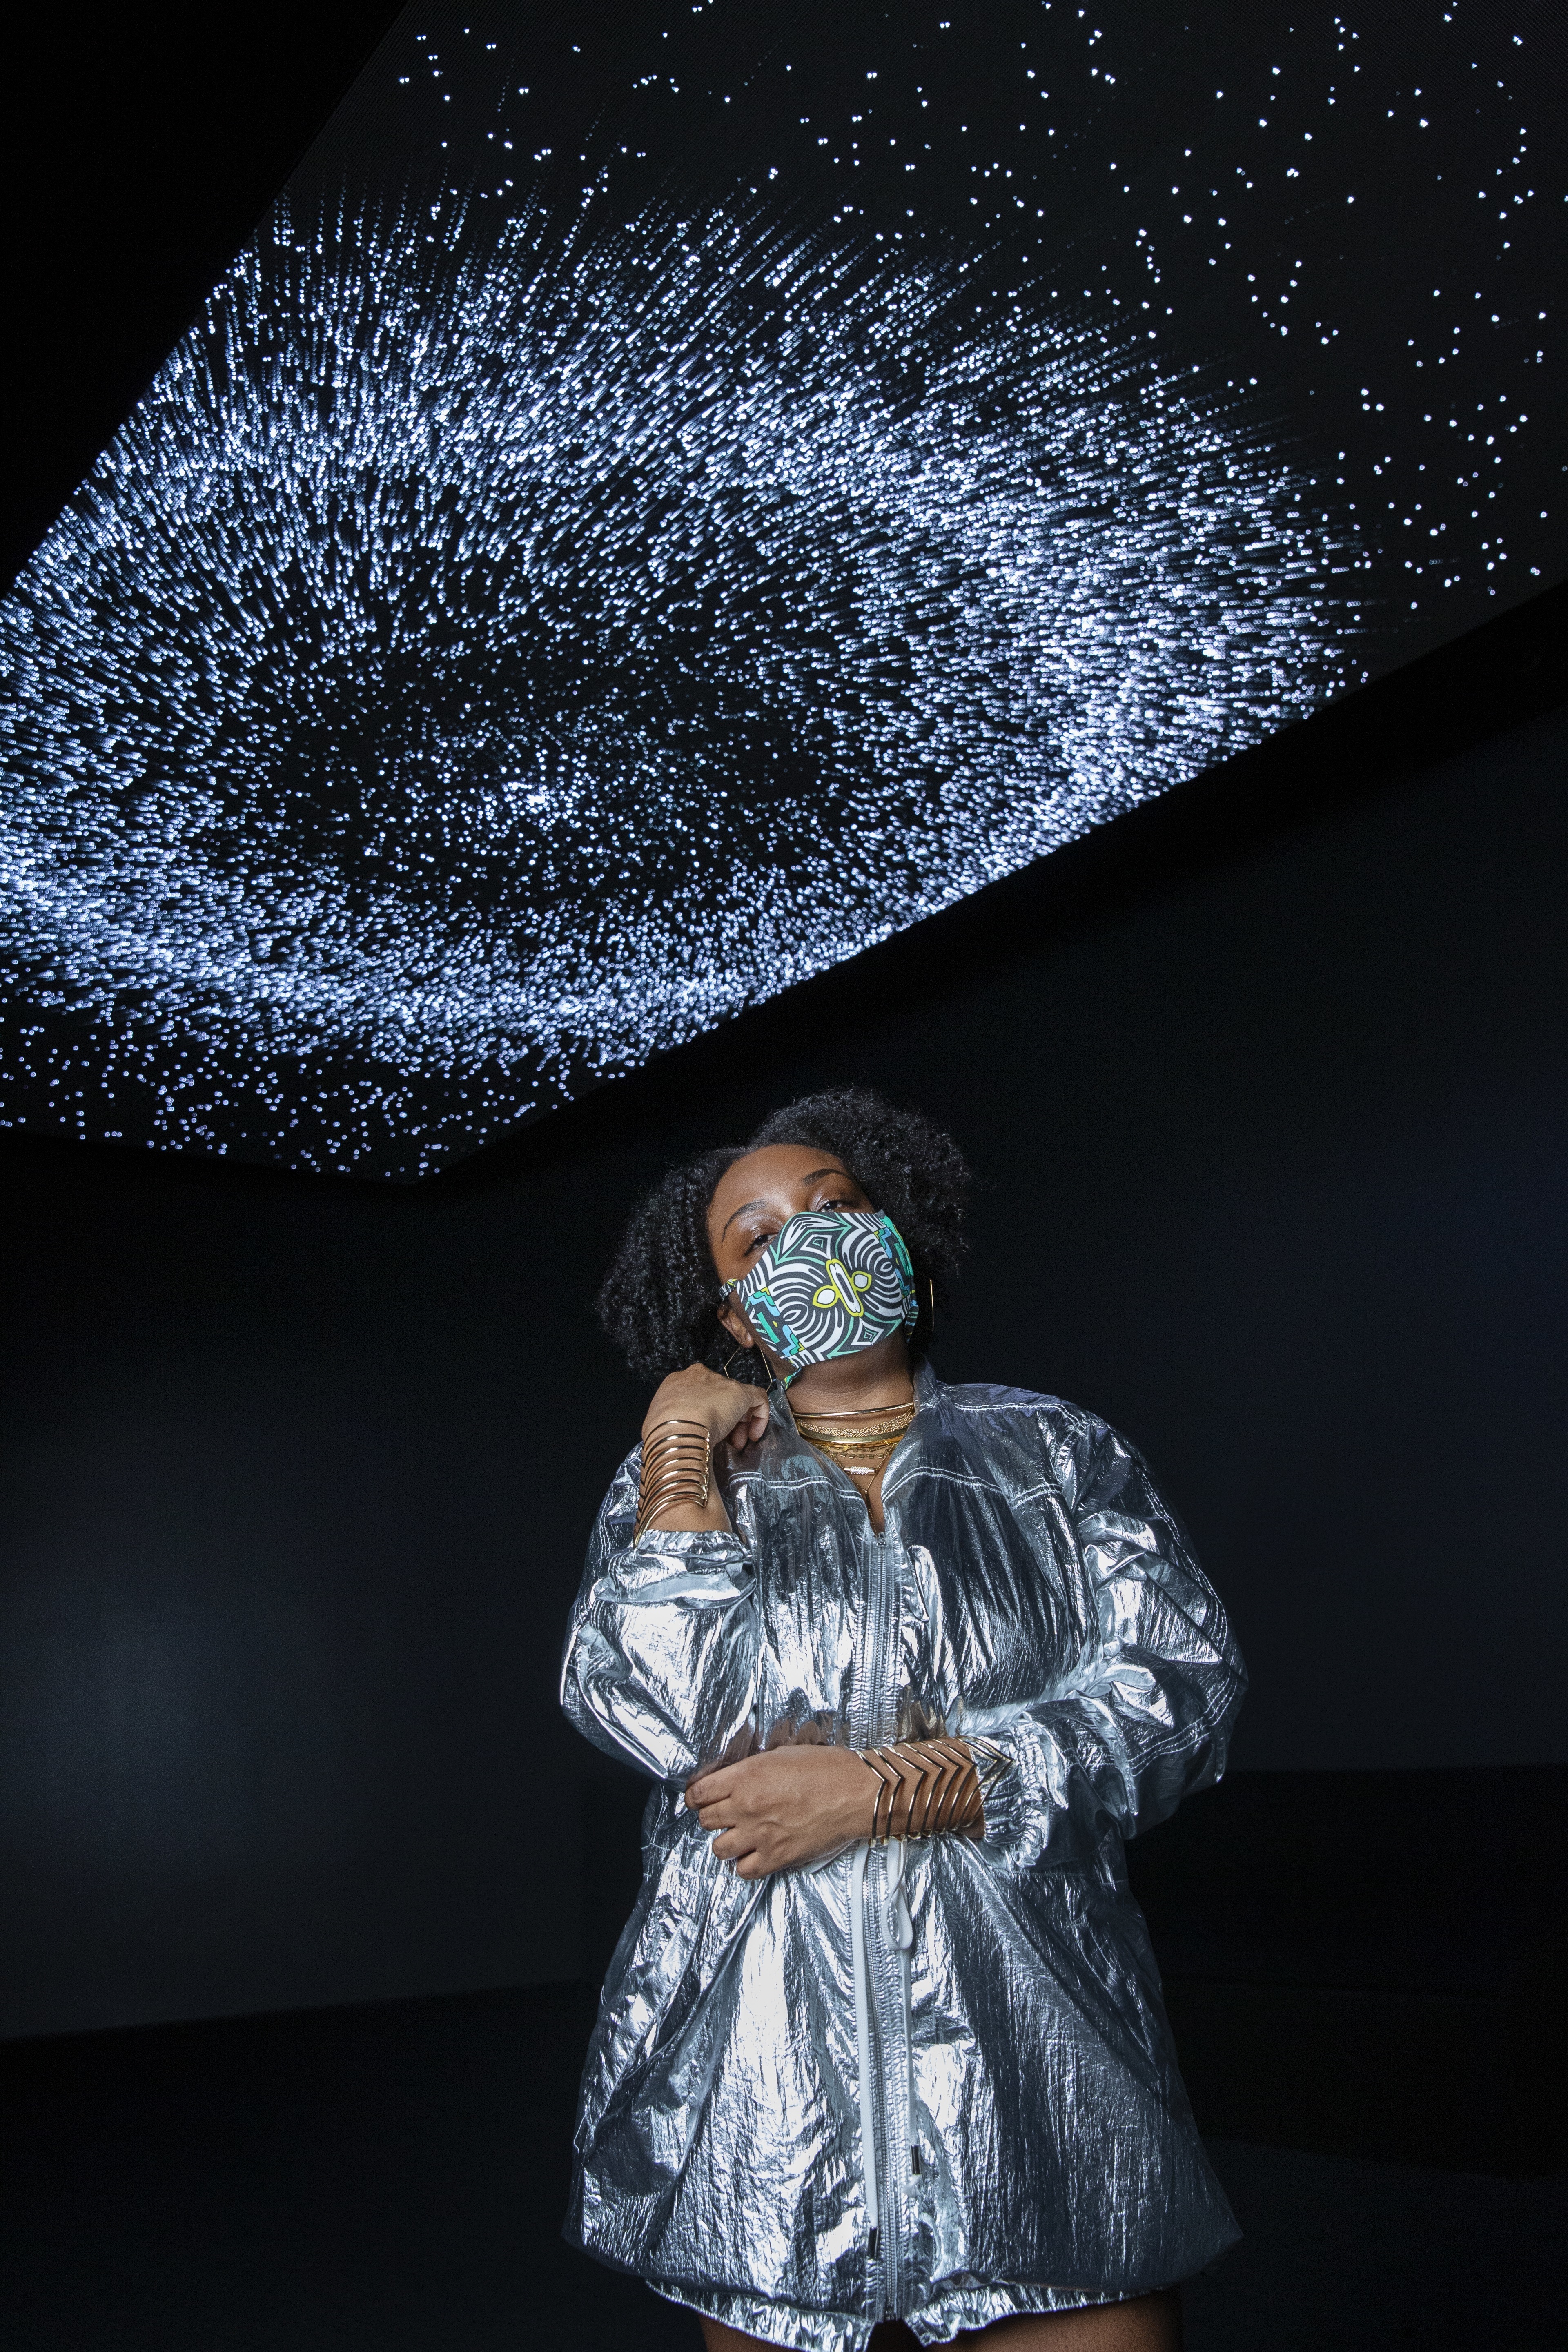 A masked figure poses in front of a digital art installation mimicking a starry night sky